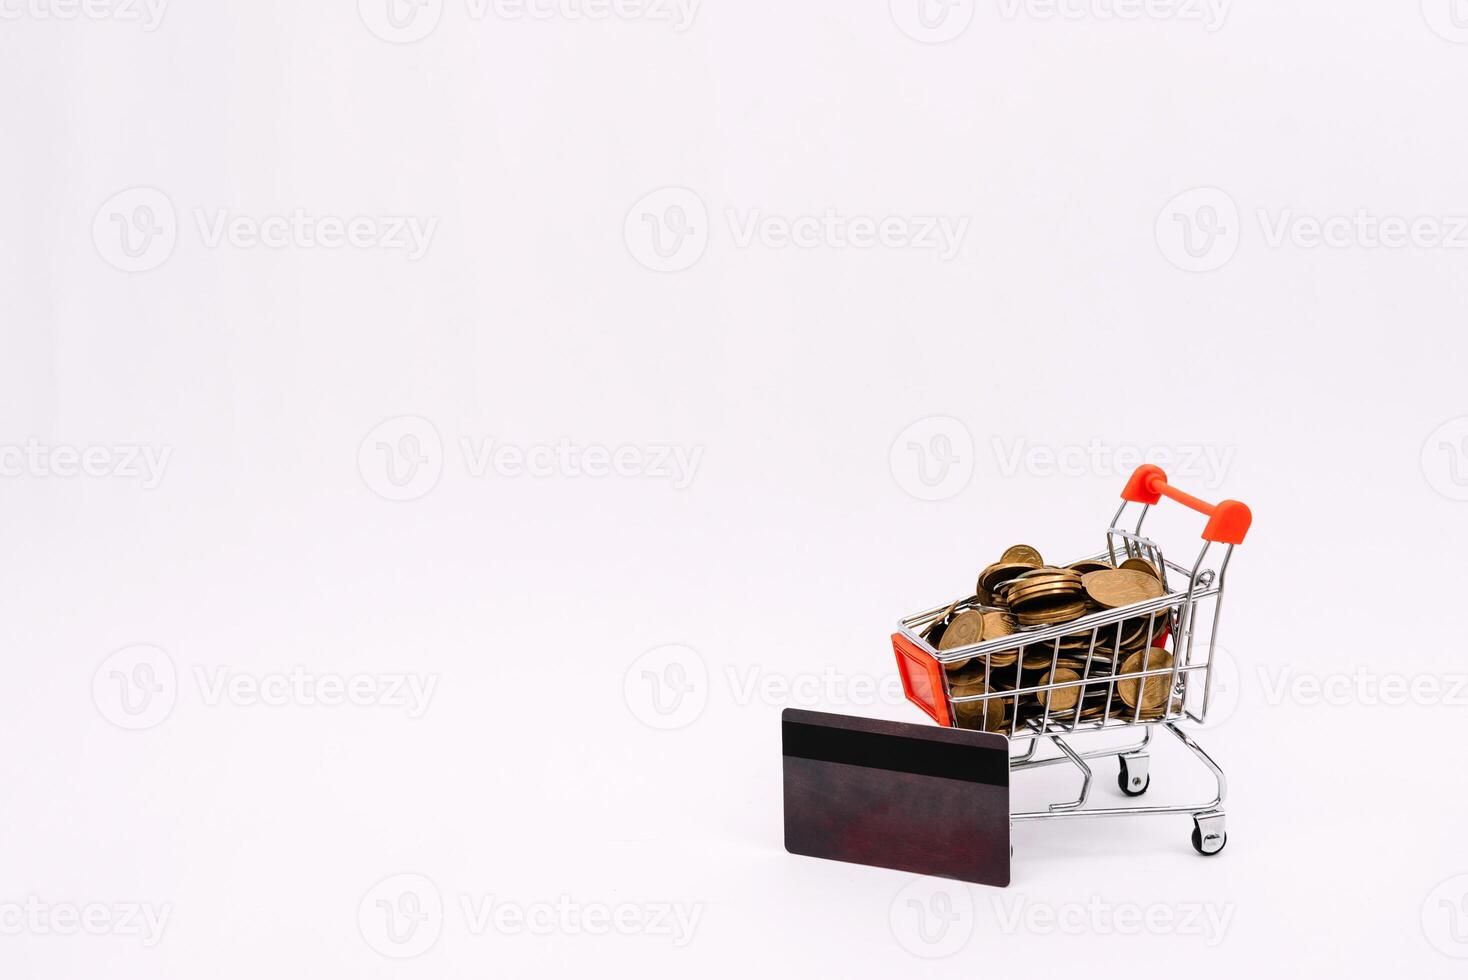 online shopping or internet shop concepts, with shopping cart symbol. isolated photo